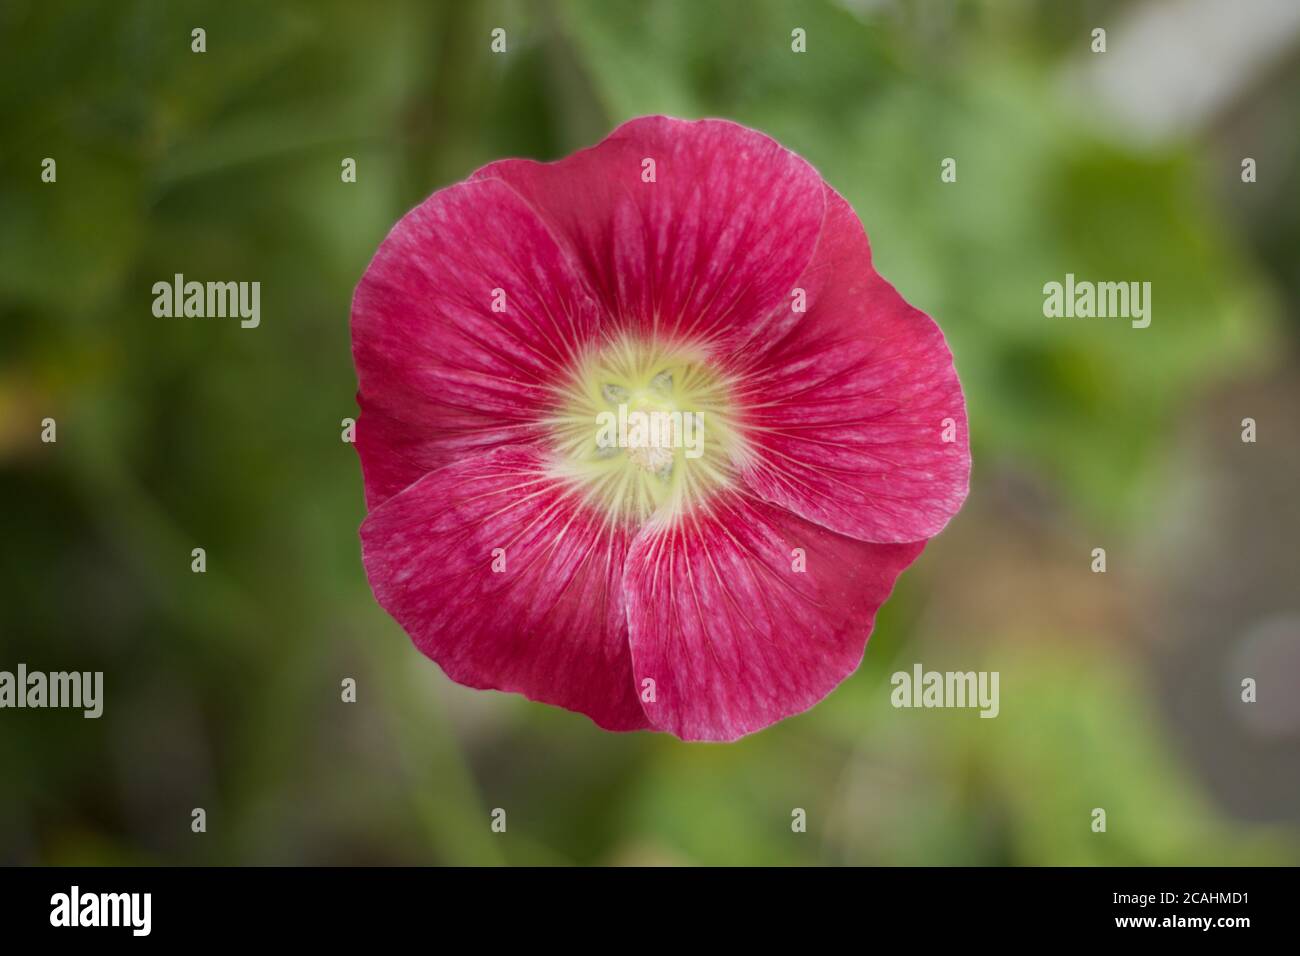 Beautiful single pink red hollyhock flower against soft background with copy space Stock Photo